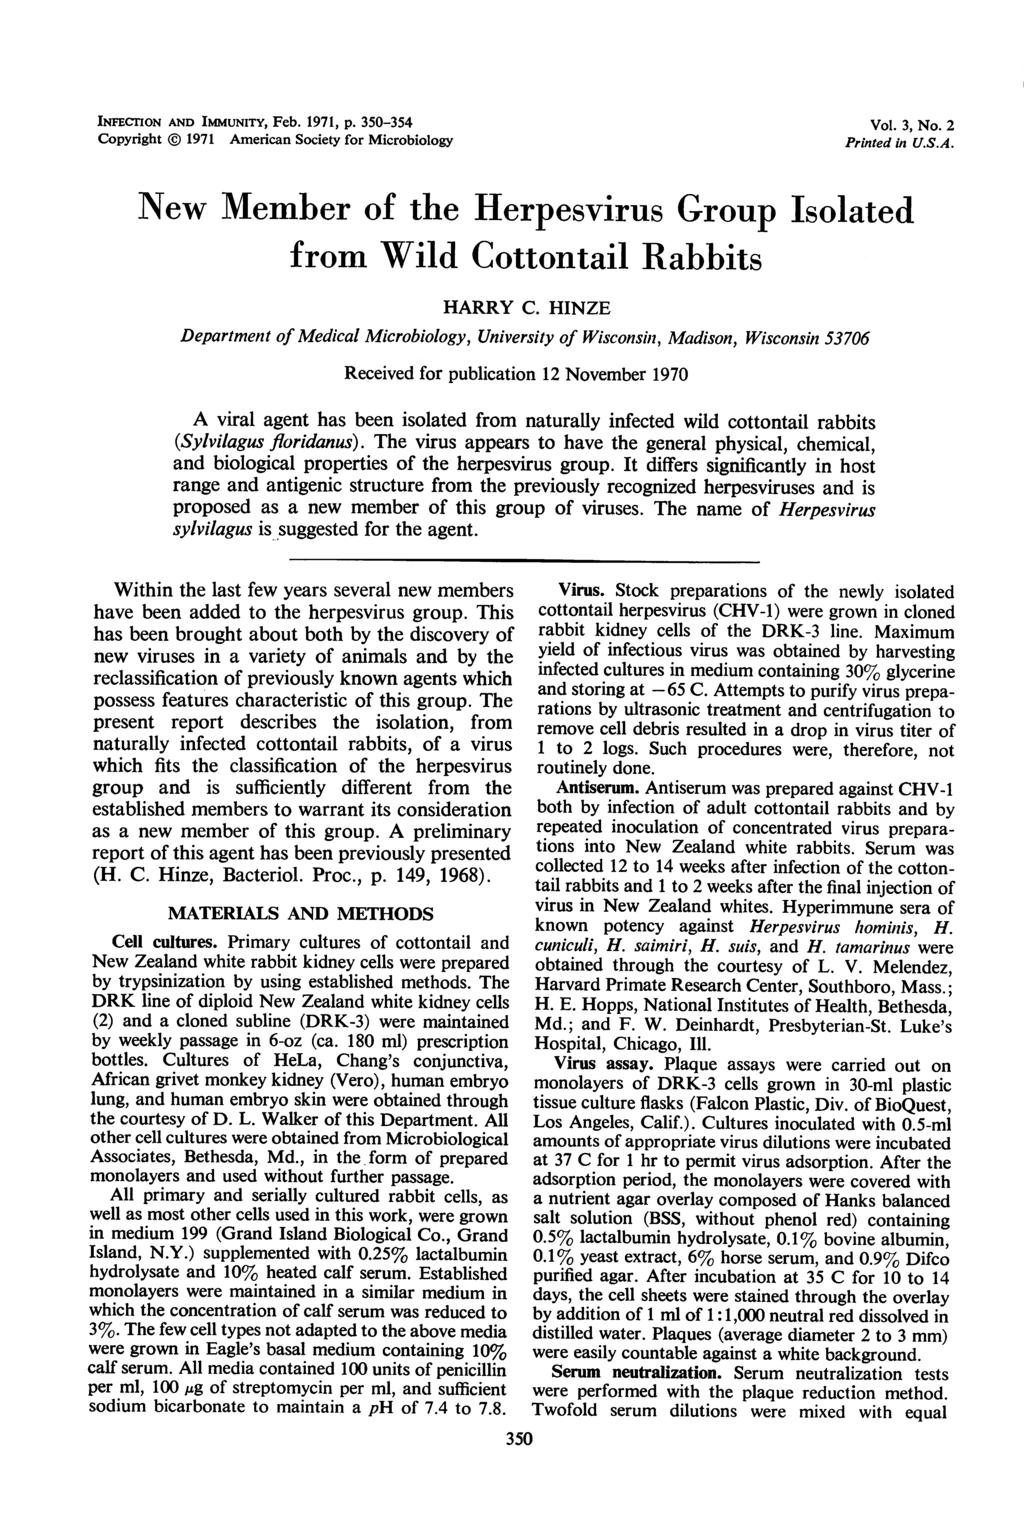 INFECrION AND IMMUNITY, Feb. 1971, p. 350-354 Copyright 1971 American Society for Microbiology Vol. 3, No. 2 Printed in U.S.A. New Member of the Herpesvirus Group Isolated from Wild Cottontail Rabbits HARRY C.